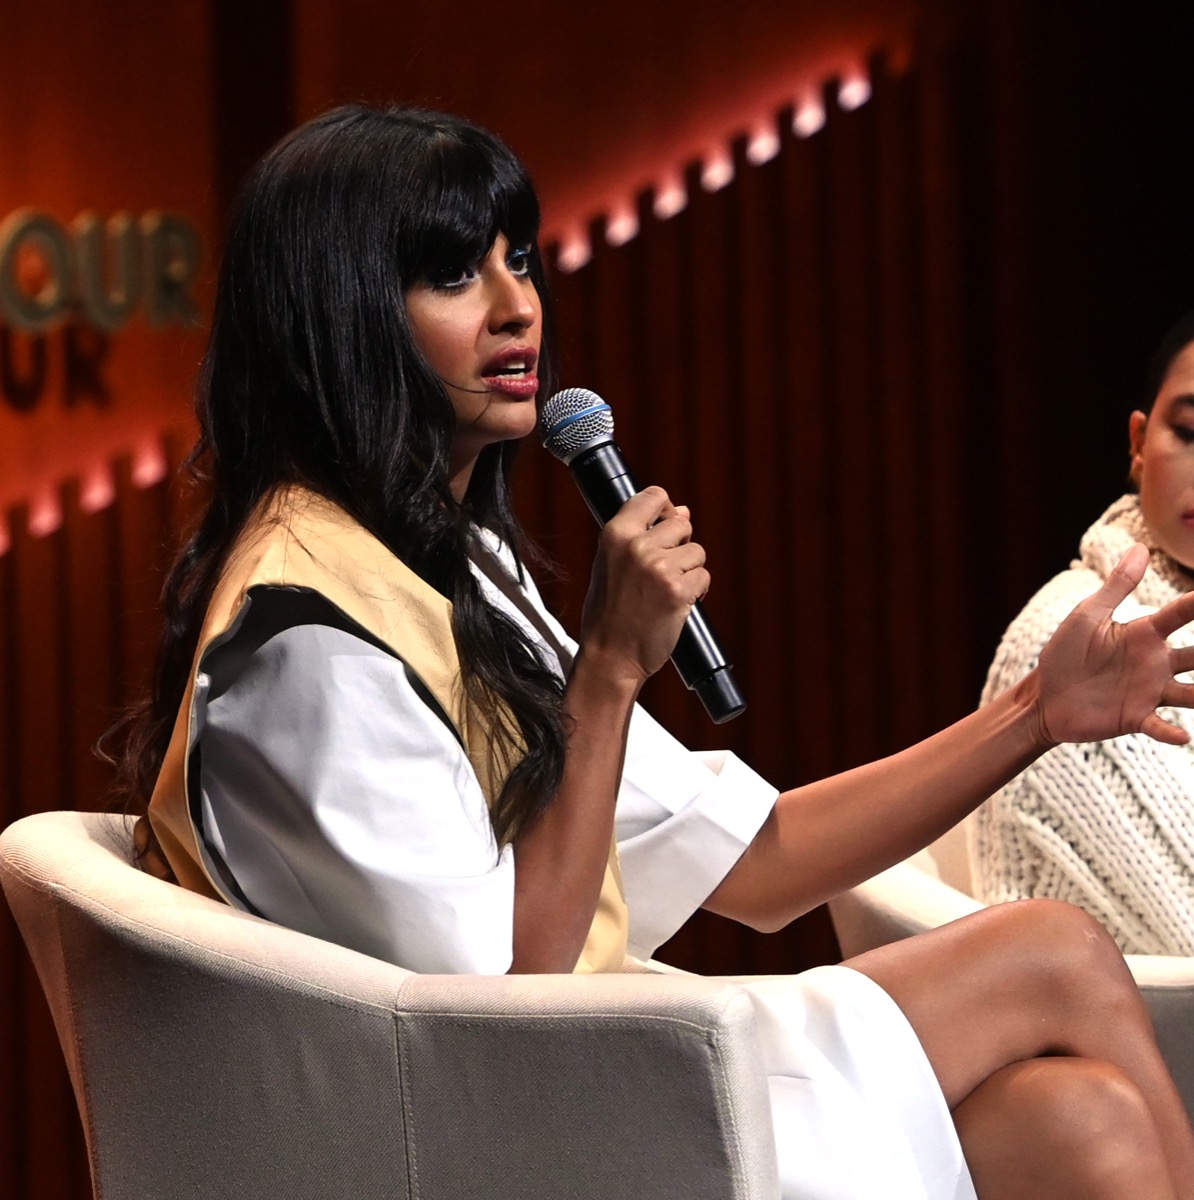 jameela jamil in white top and tan vest holding microphone while seated